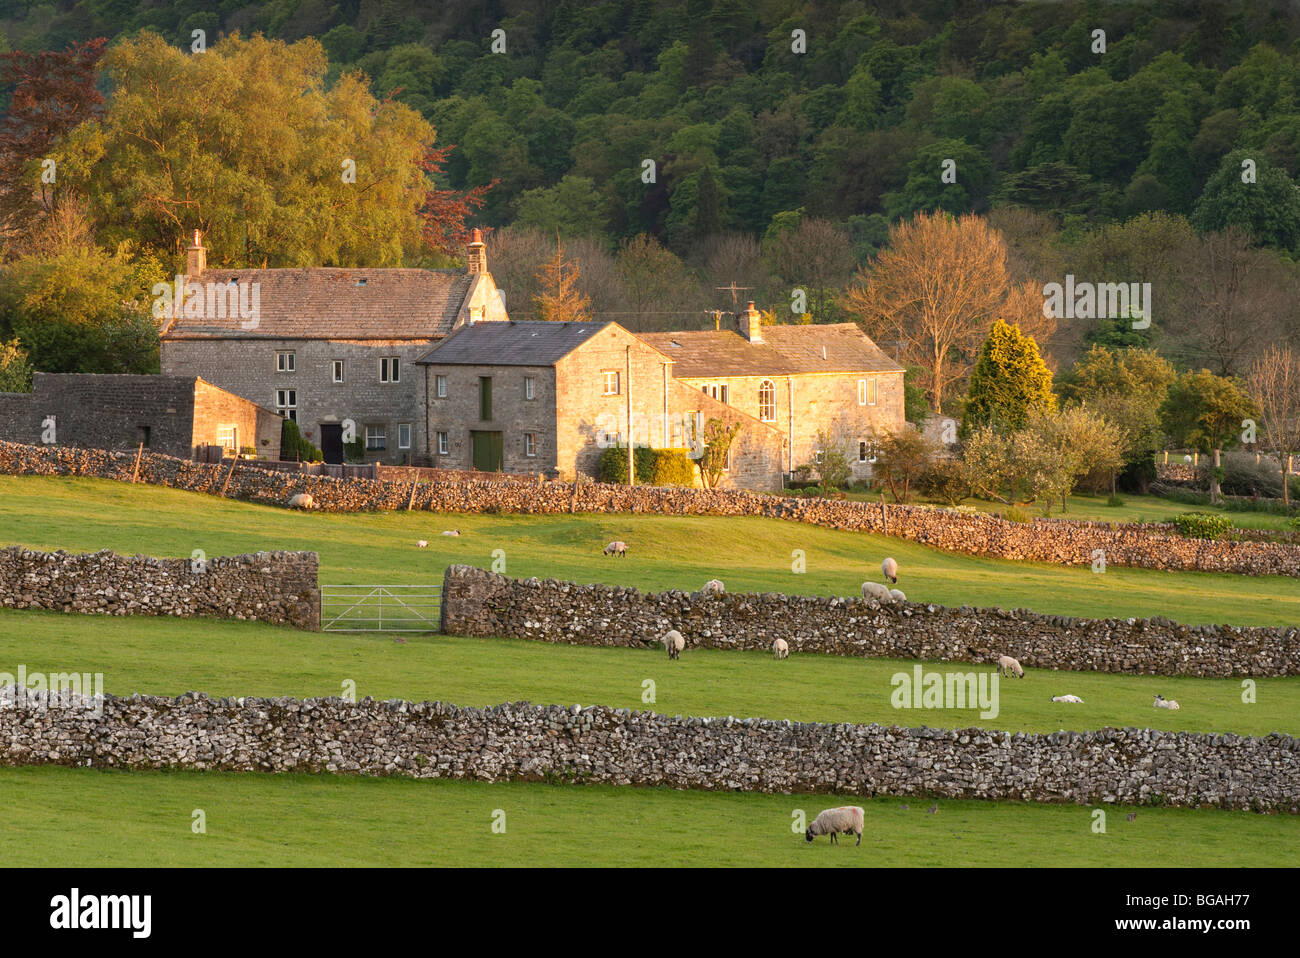 Buckden in Upper Wharfedale in the Yorkshire Dales. Stock Photo